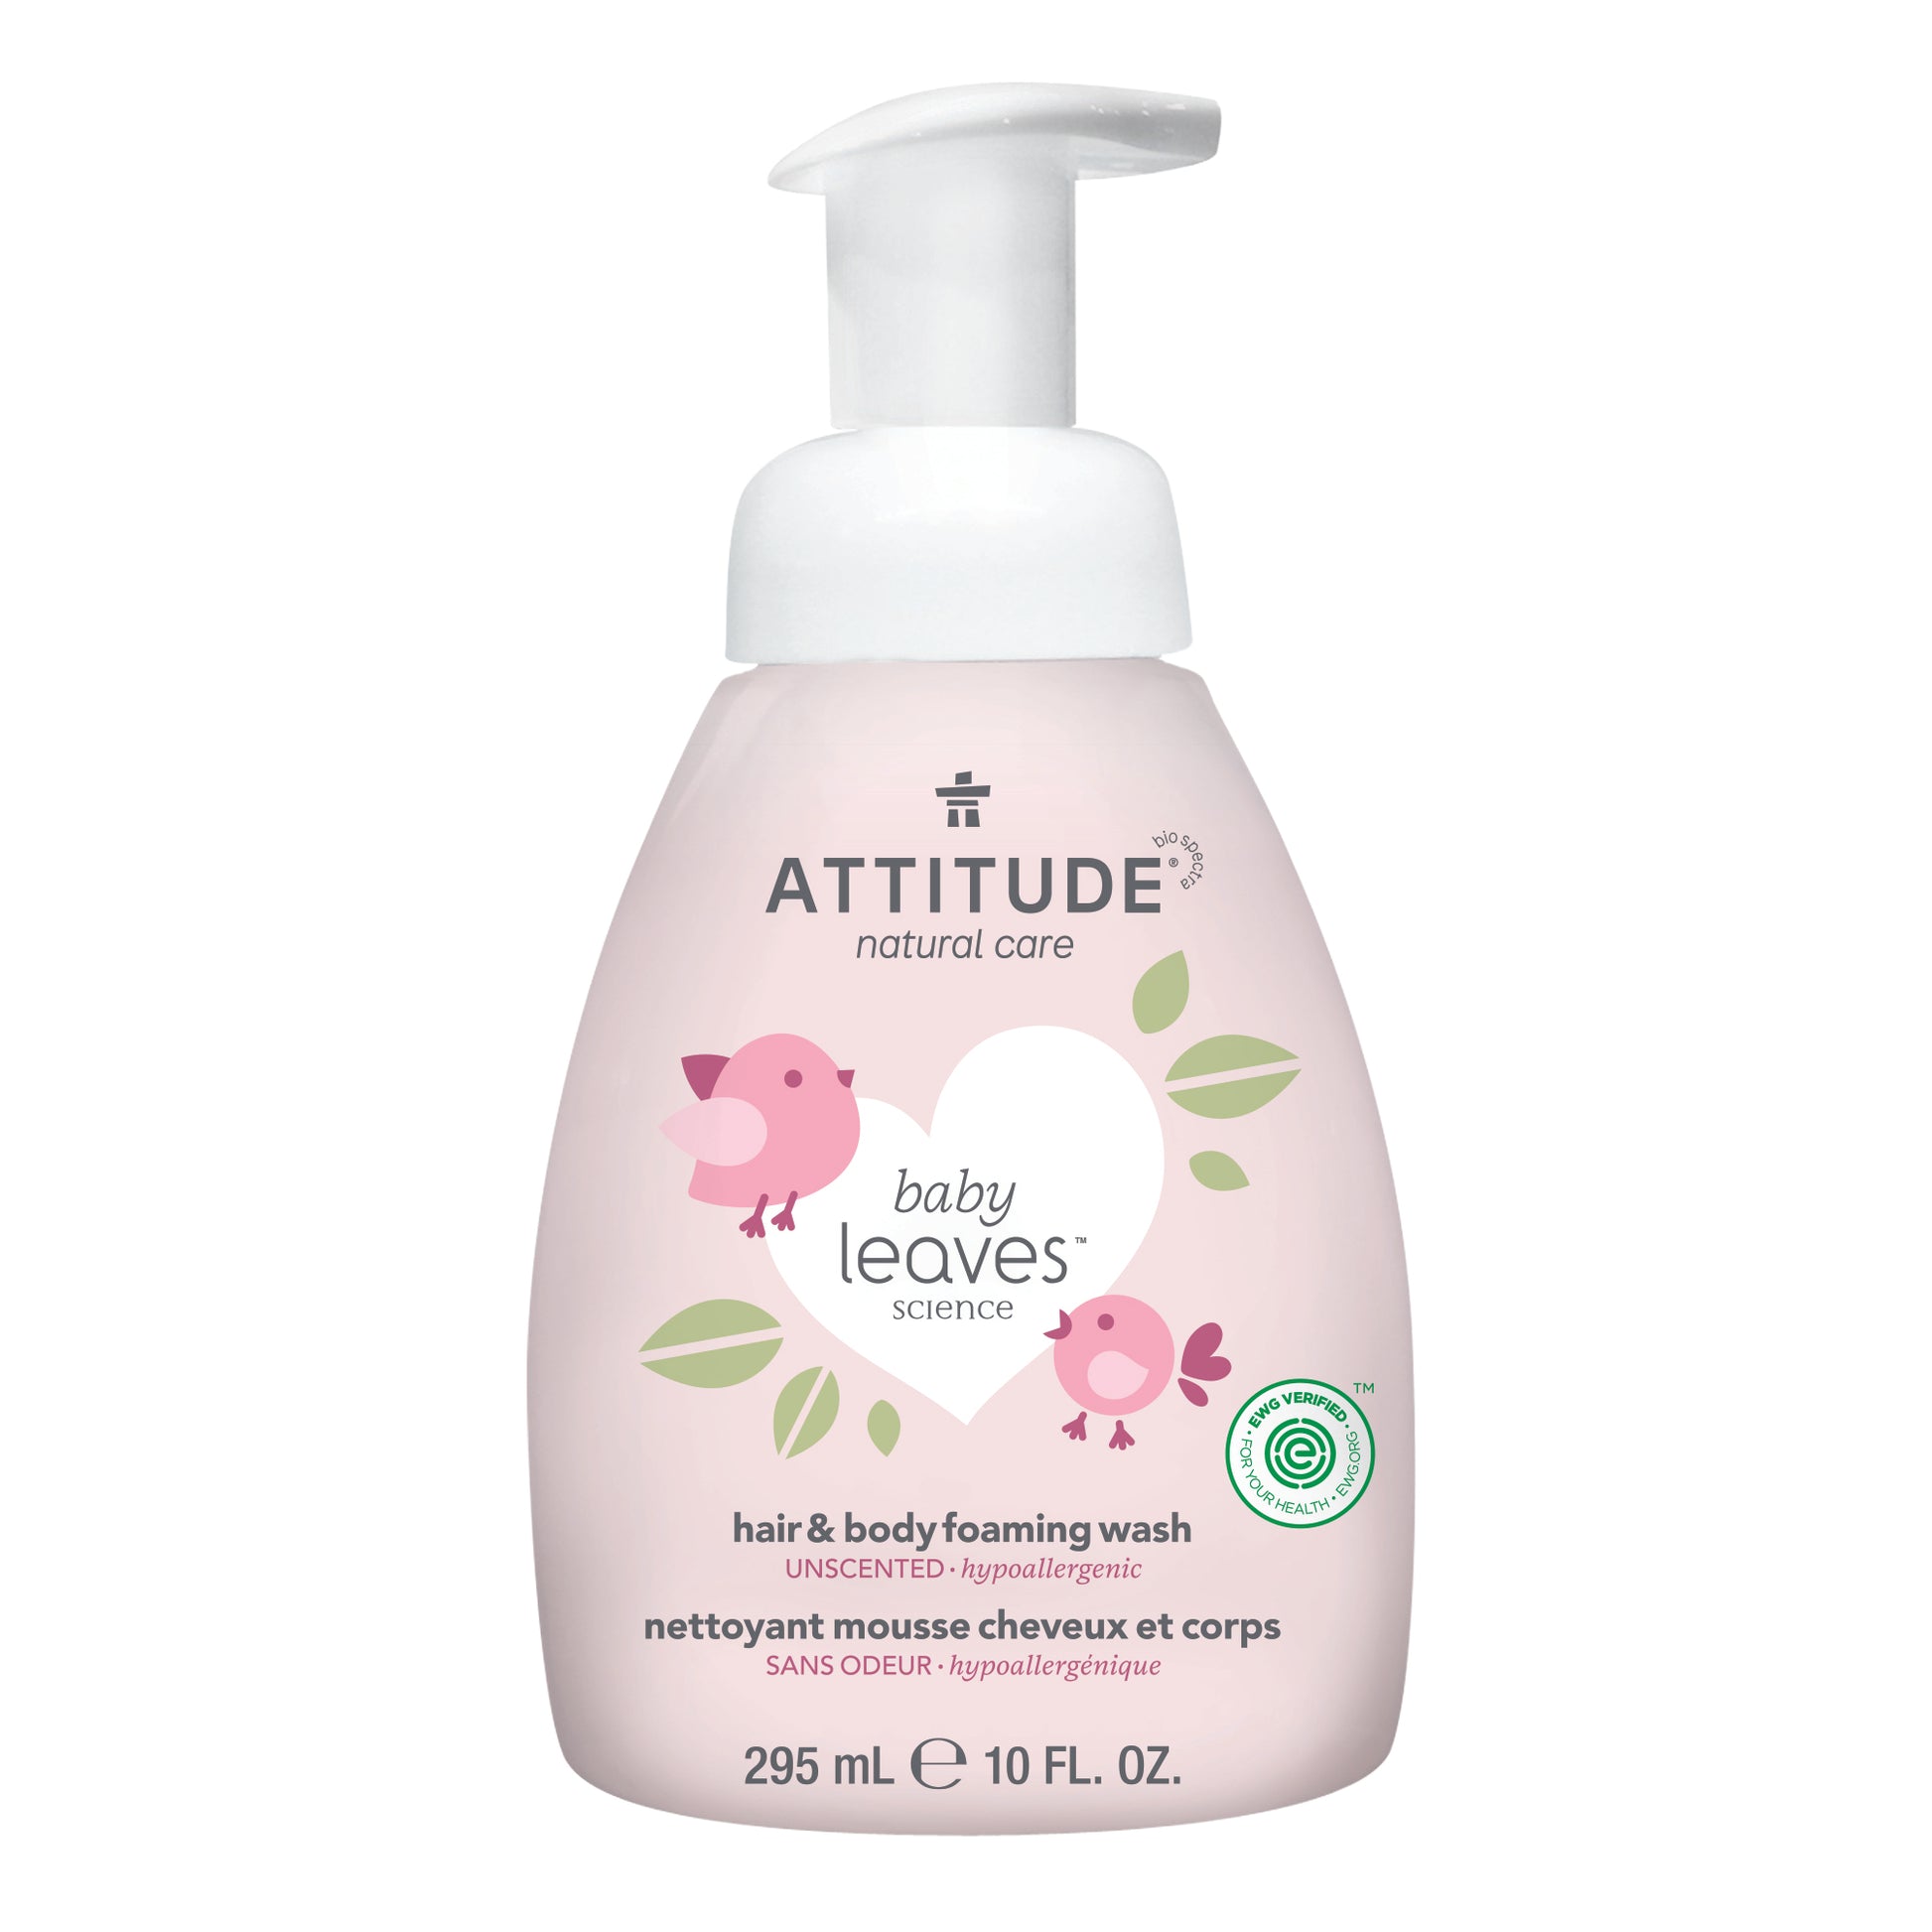 ATTITUDE baby leaves™ 2-in-1 Hair and Body Foaming Wash Fragrance-free 16635_en?_main? Unscented